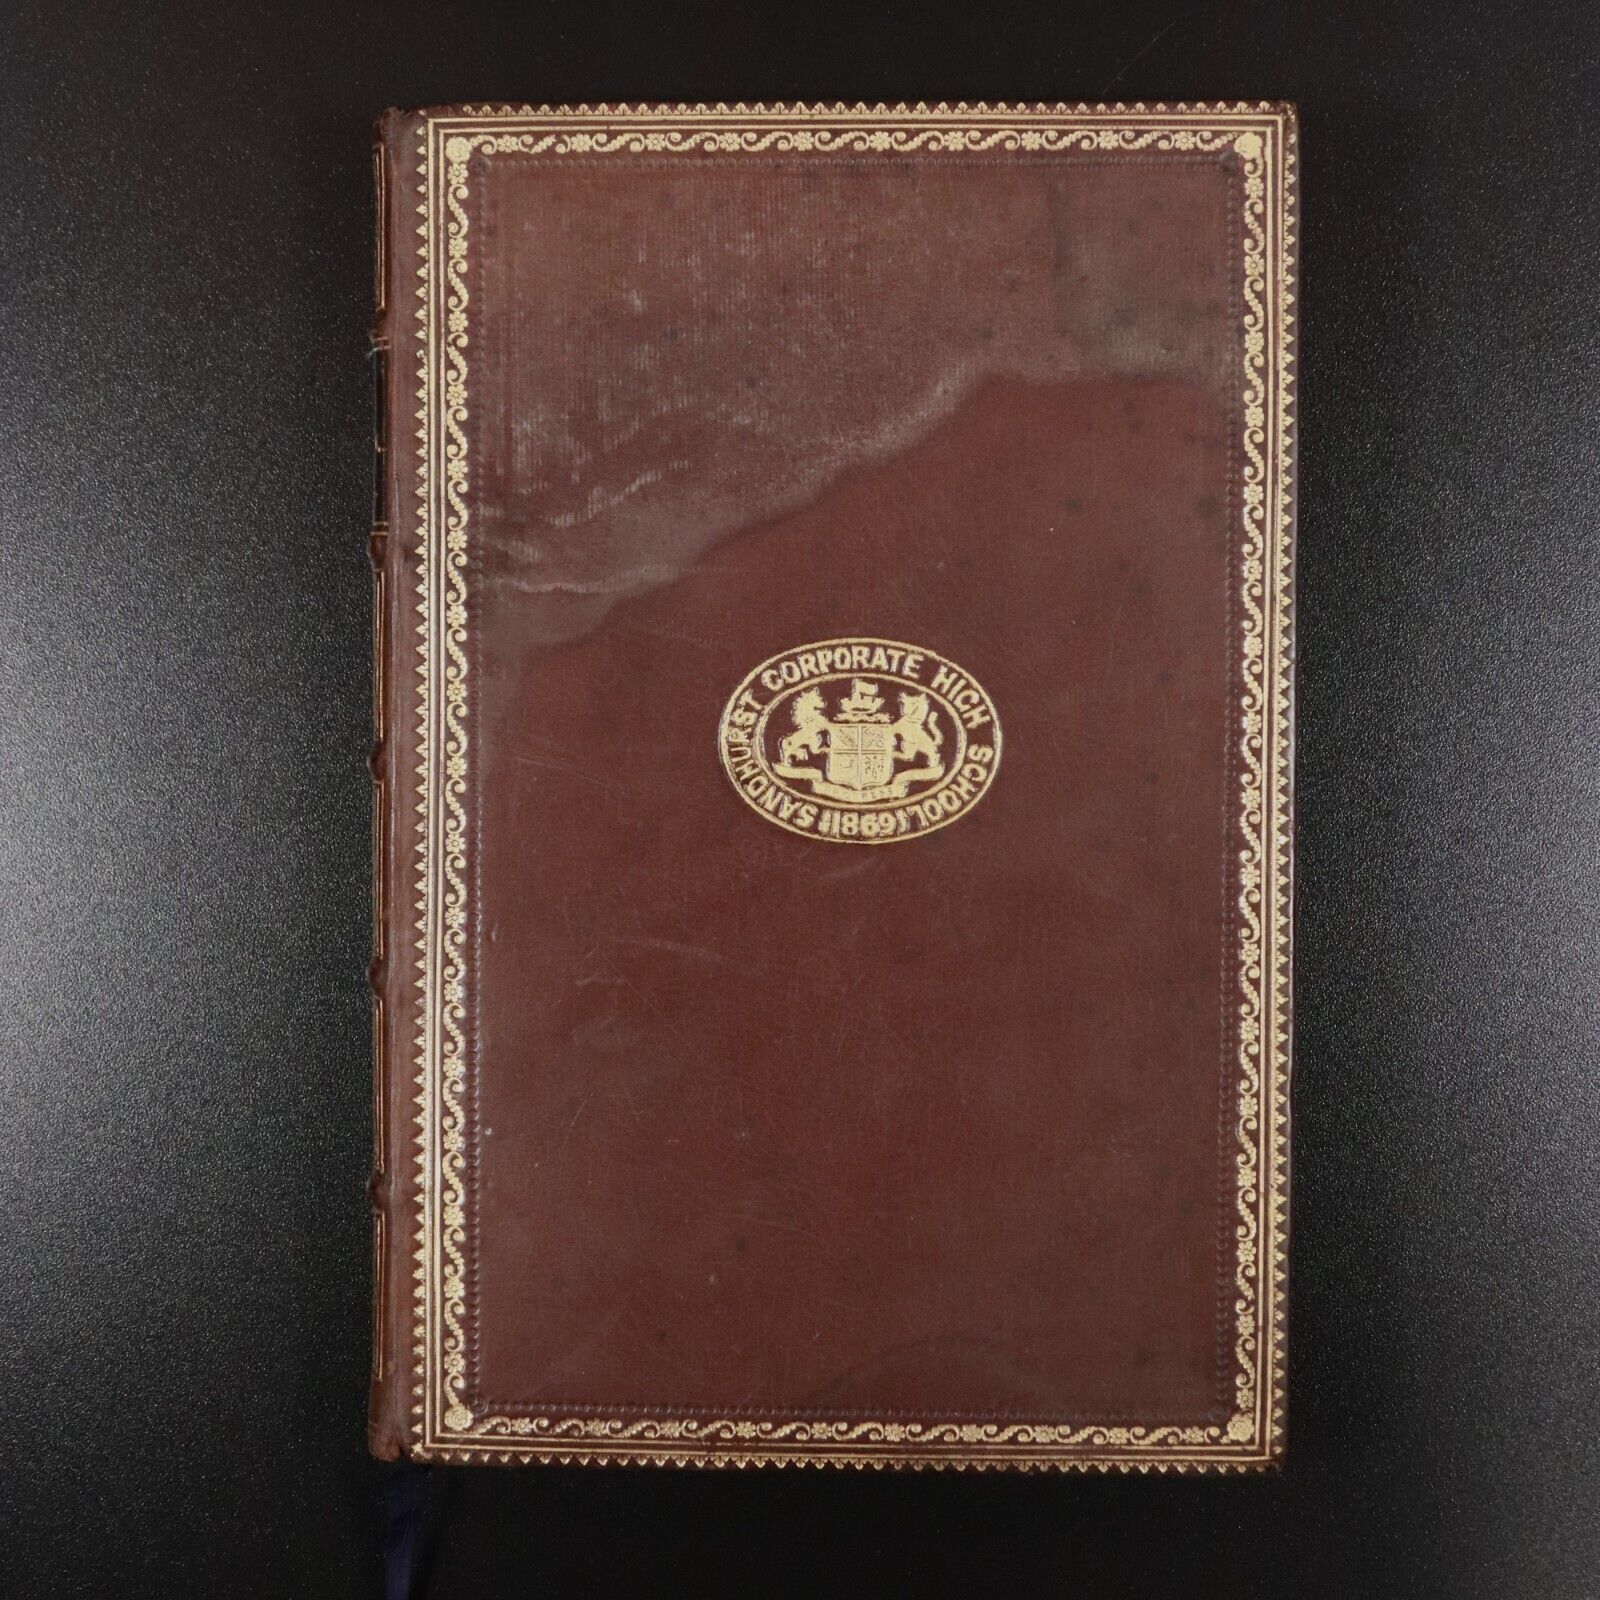 1865 More Worlds Than One by David Brewster Antiquarian Philosophy Book Theology